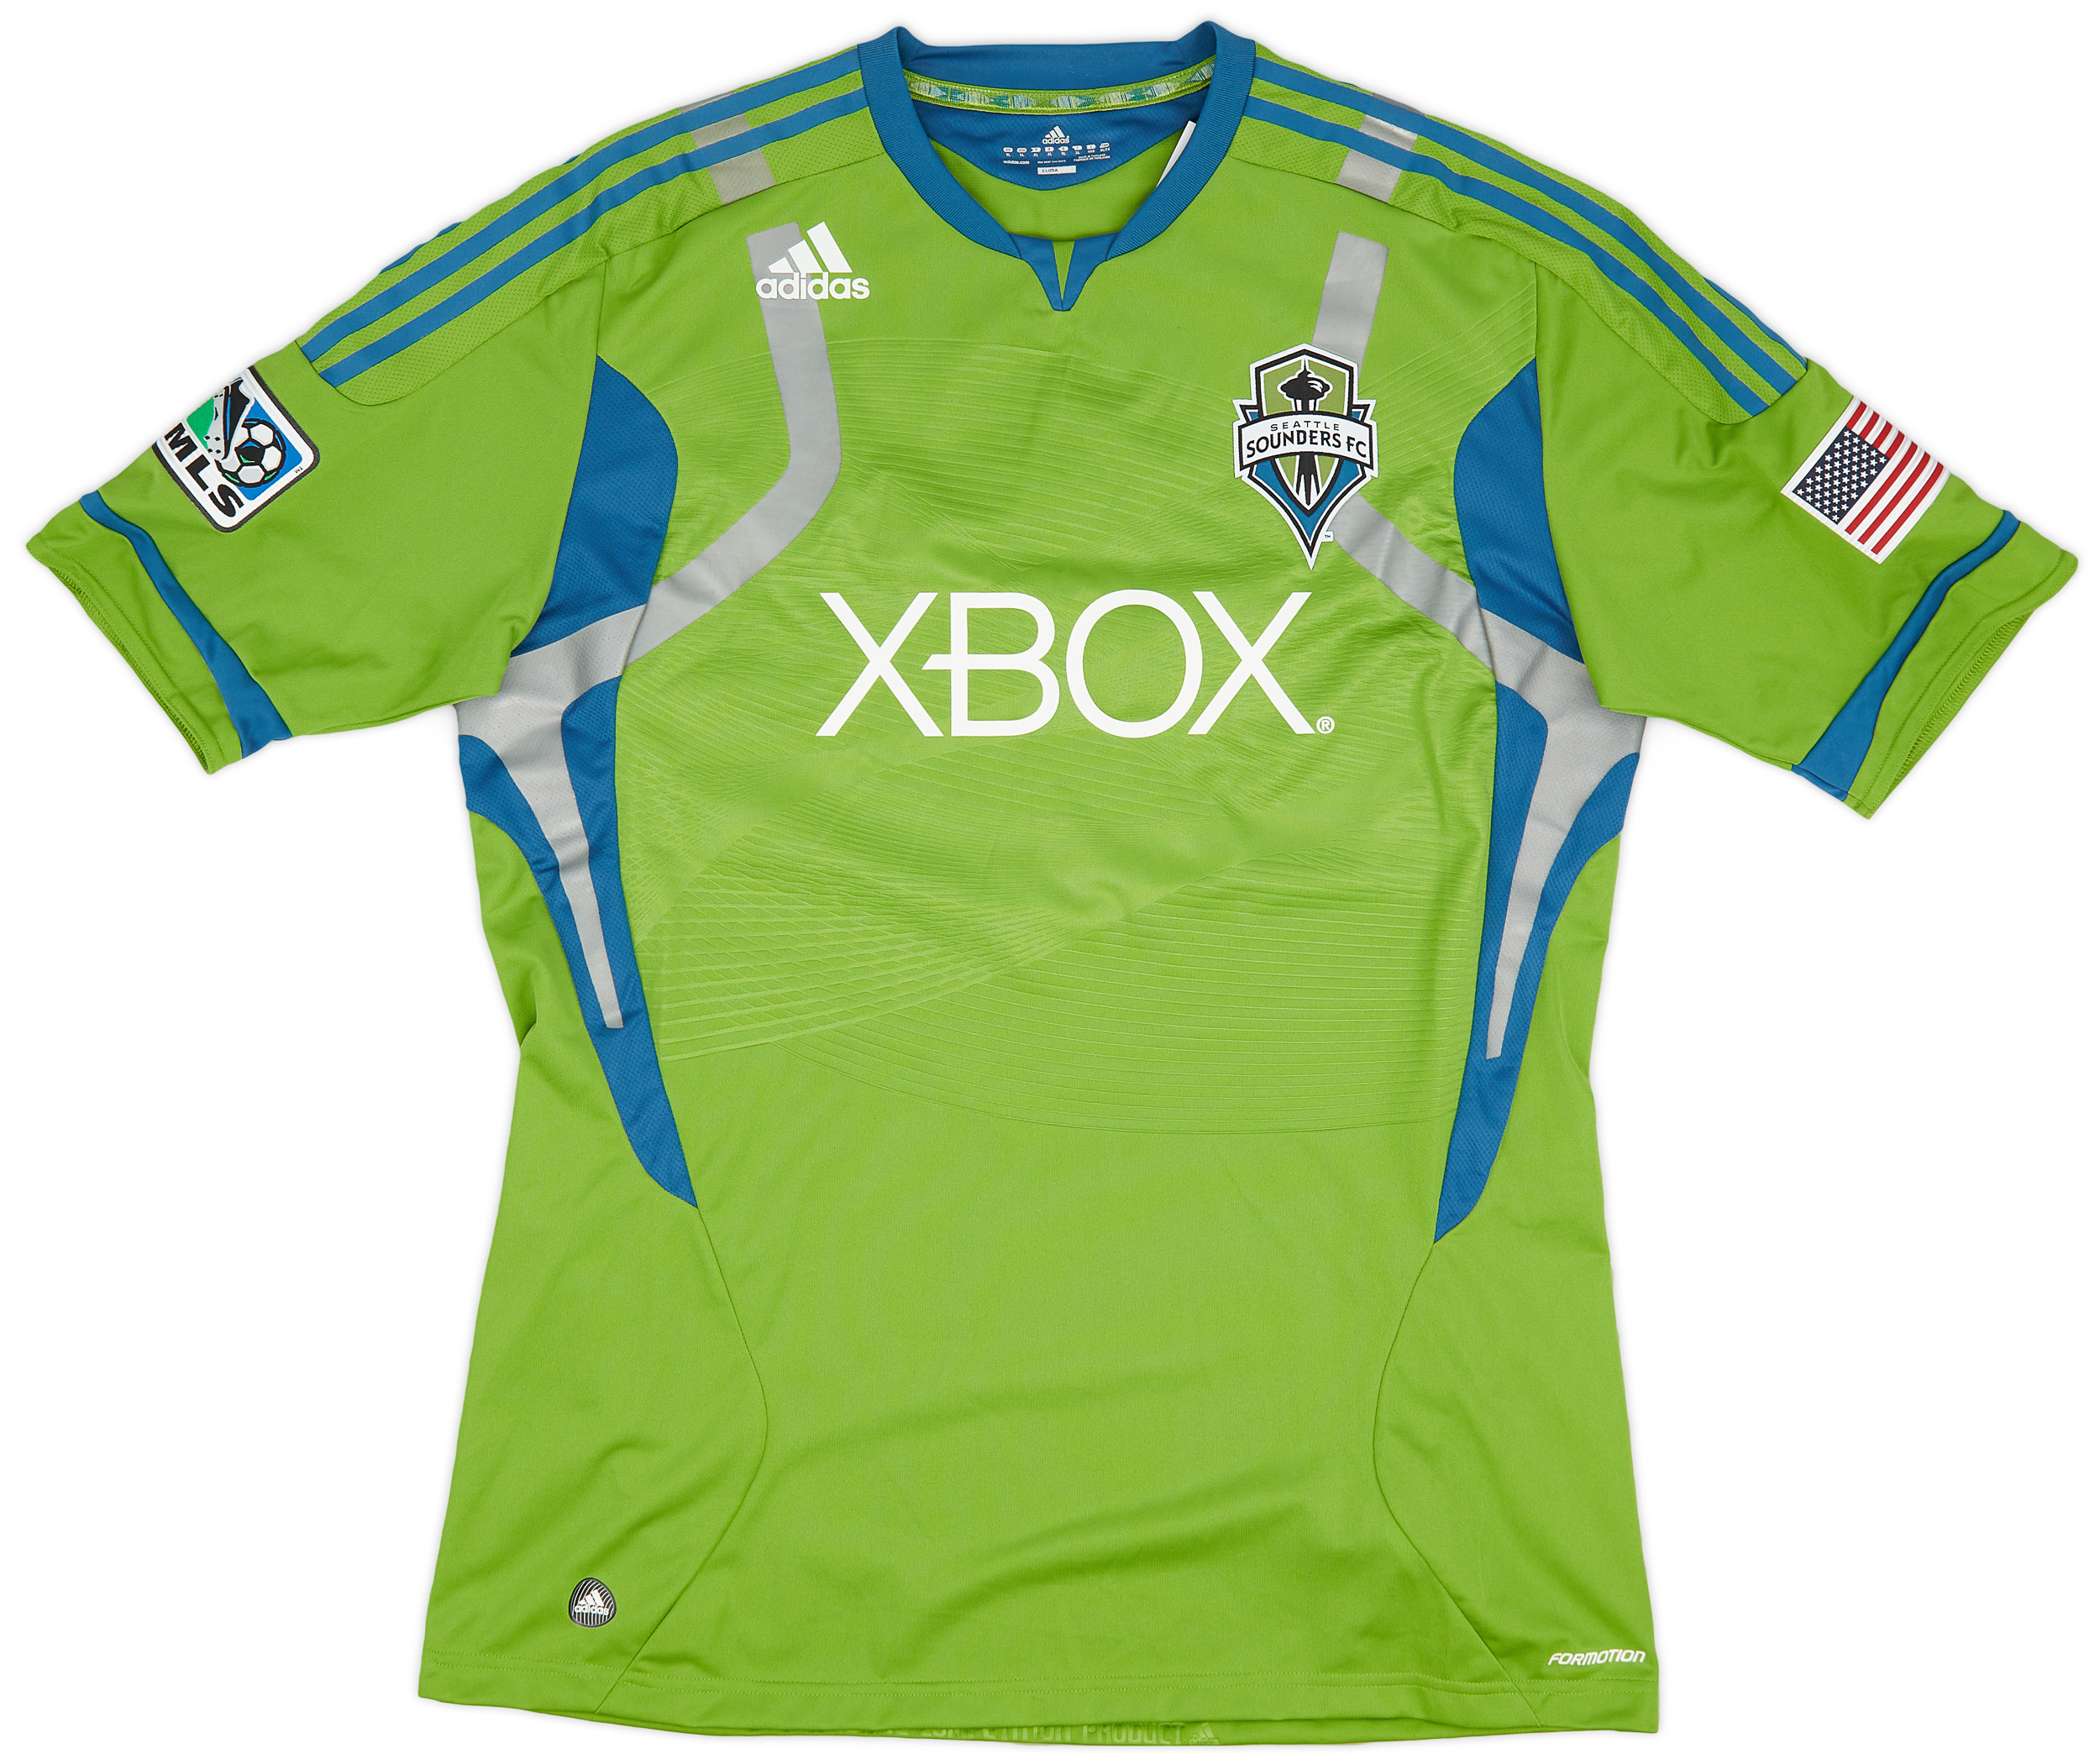 2010 Seattle Sounders Player Issue Home Shirt - 9/10 - ()